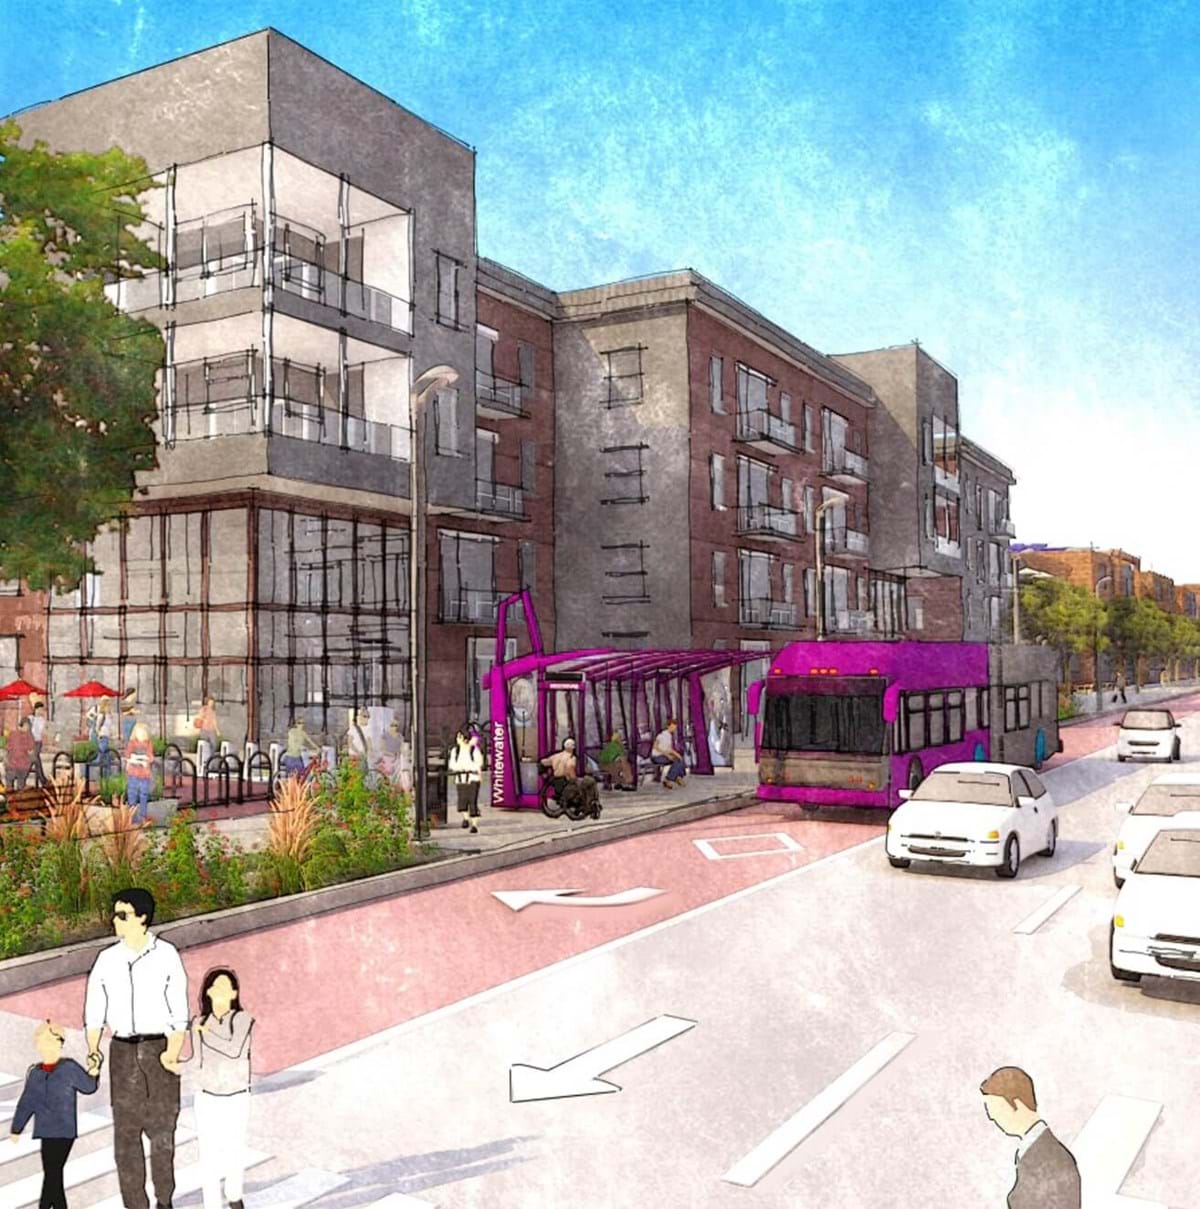 Rendering of 4-story buildings with bus in front, multiple lanes of traffic and people crossing street